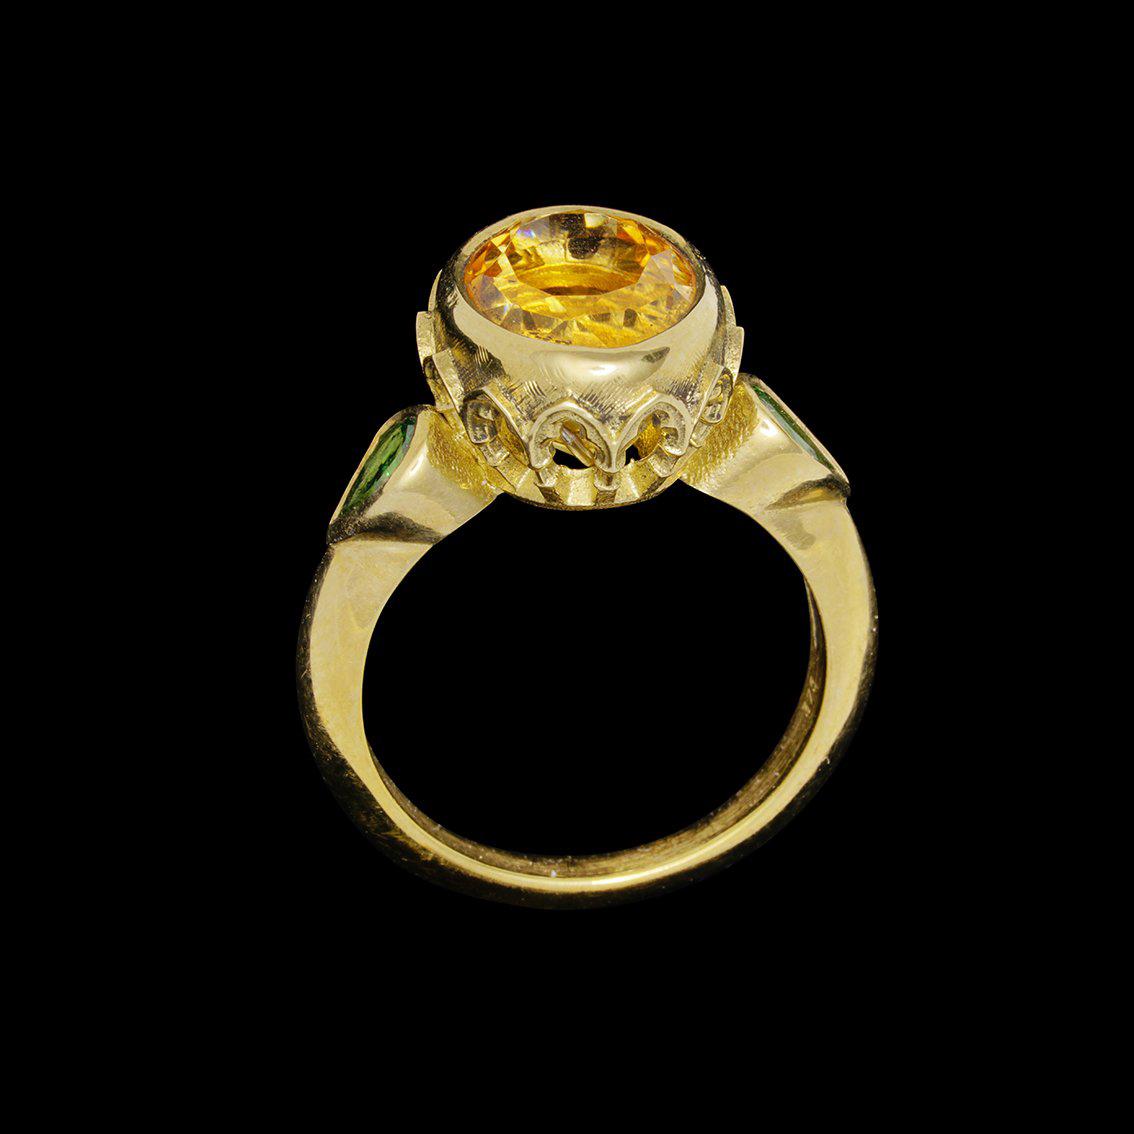 Garden of the Hesperides Ring in 9 Karat Yellow Gold, Citrine and Green Garnets 1